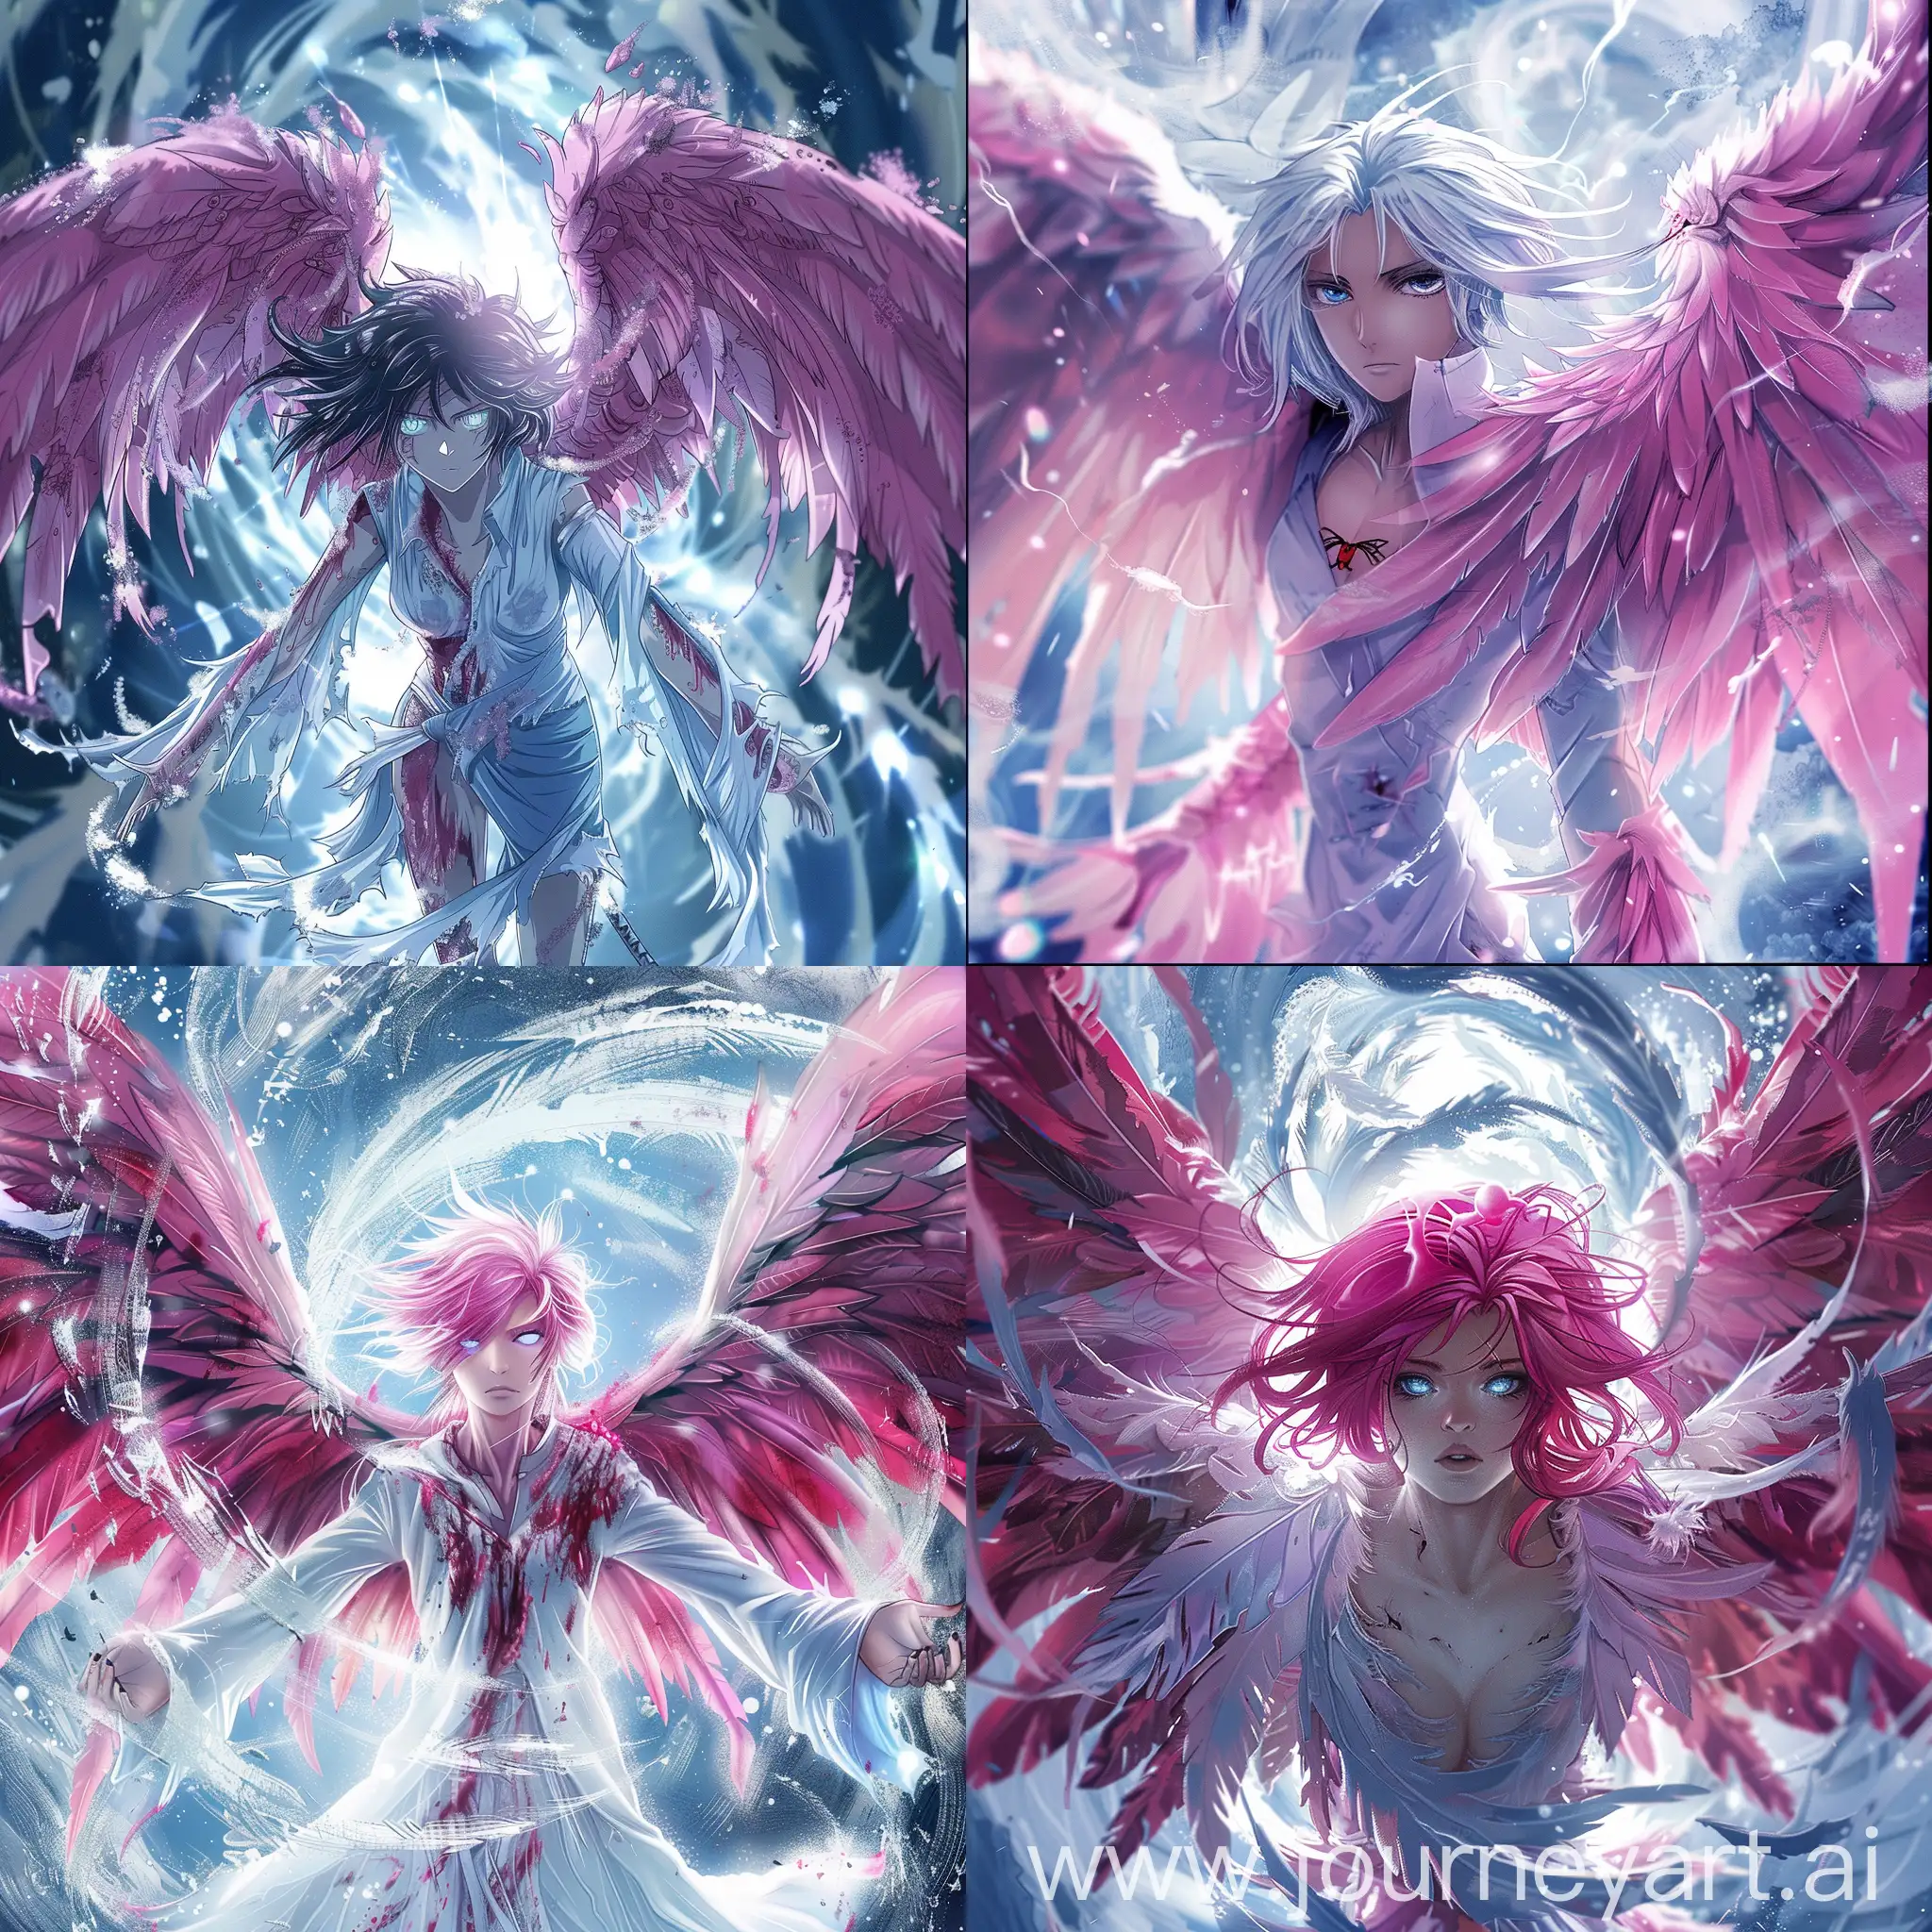 Rukia from Bleach reimagined as a celestial warrior angel. Battle-worn pink wings, ice-blue eyes blazing with determination, gleaming white against a backdrop of swirling cosmic energy. anime caled bleach style, shinigami